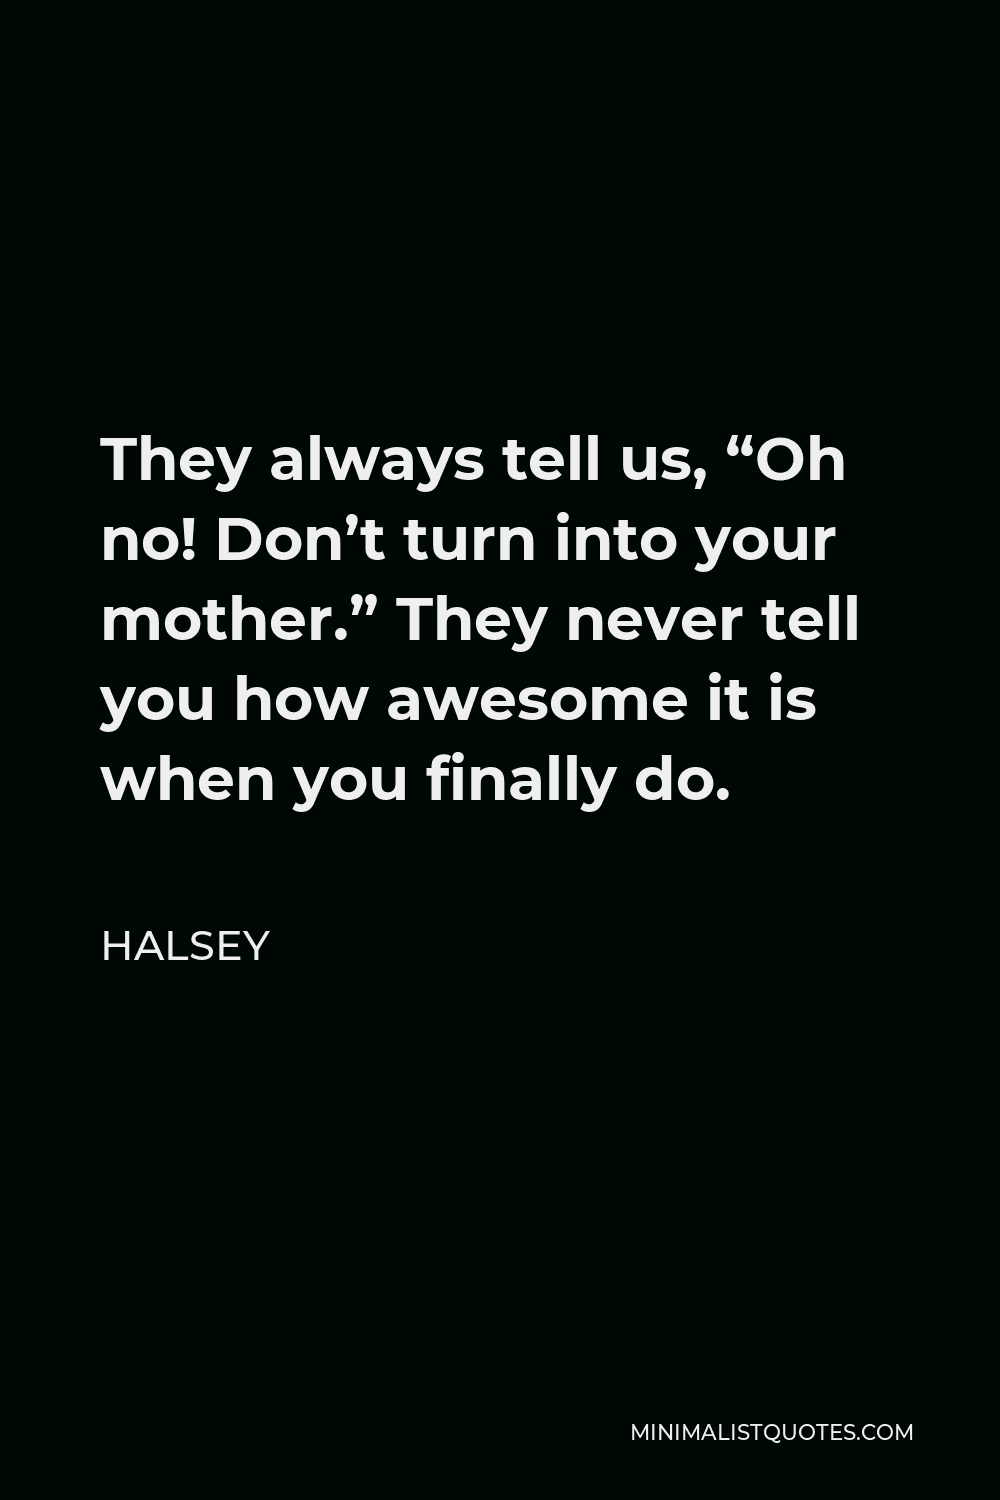 Halsey Quote - They always tell us, “Oh no! Don’t turn into your mother.” They never tell you how awesome it is when you finally do.